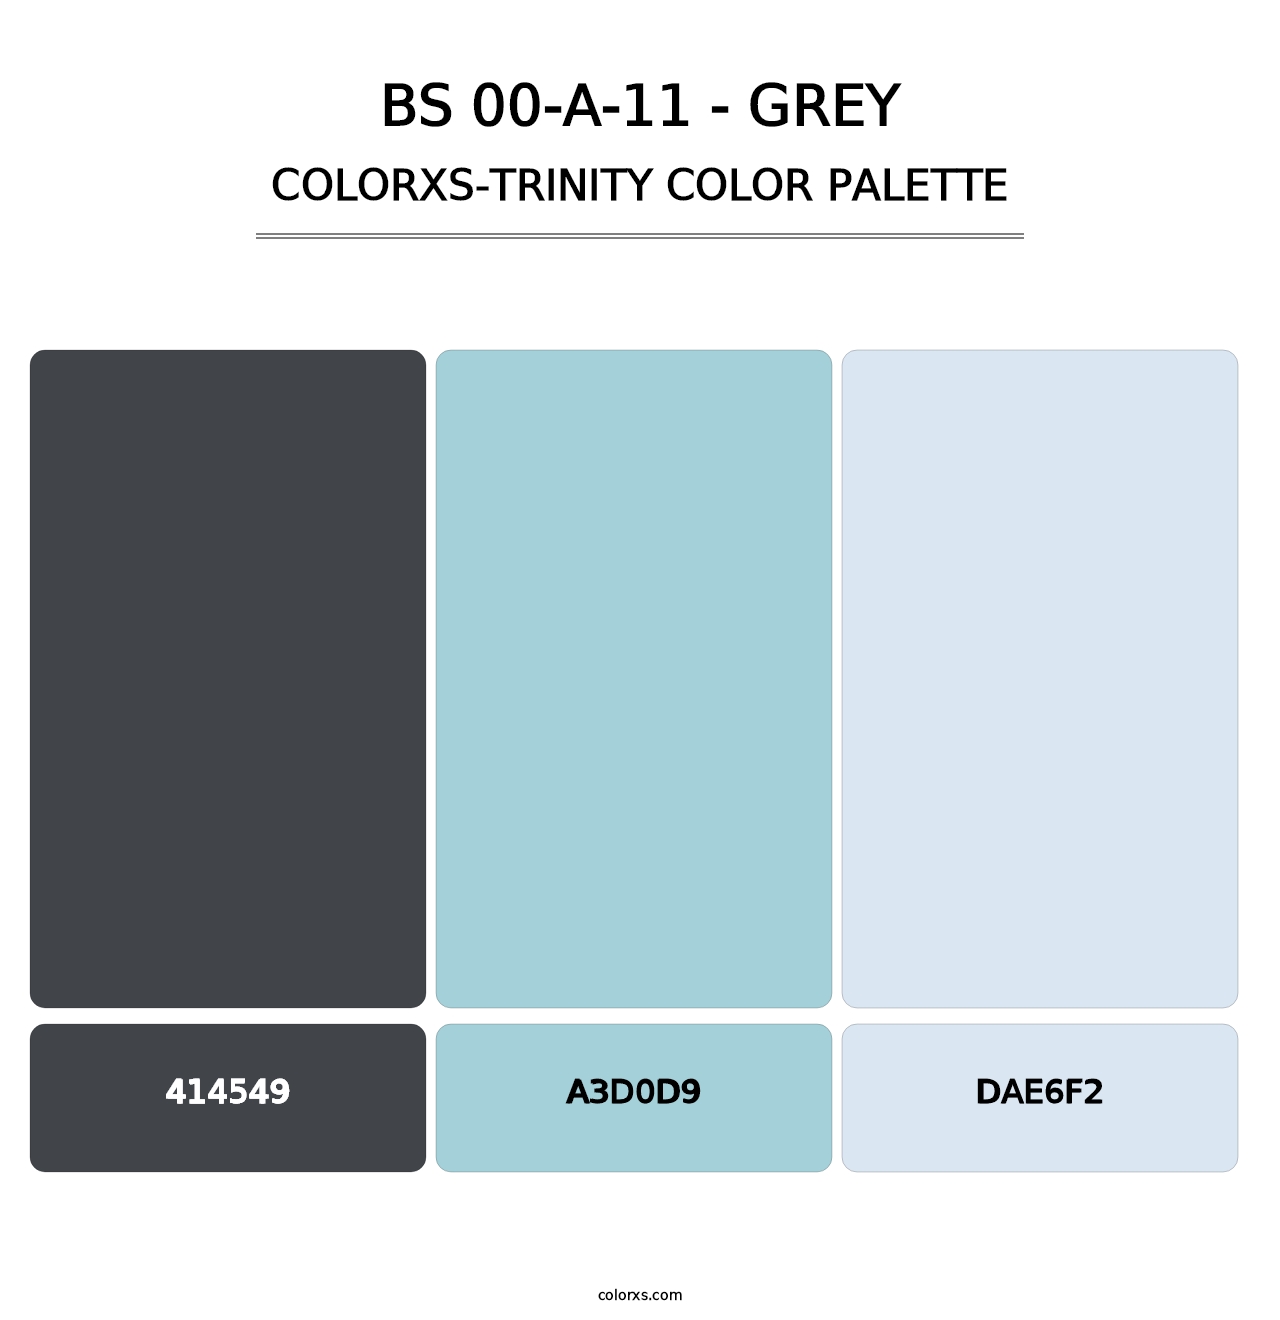 BS 00-A-11 - Grey - Colorxs Trinity Palette